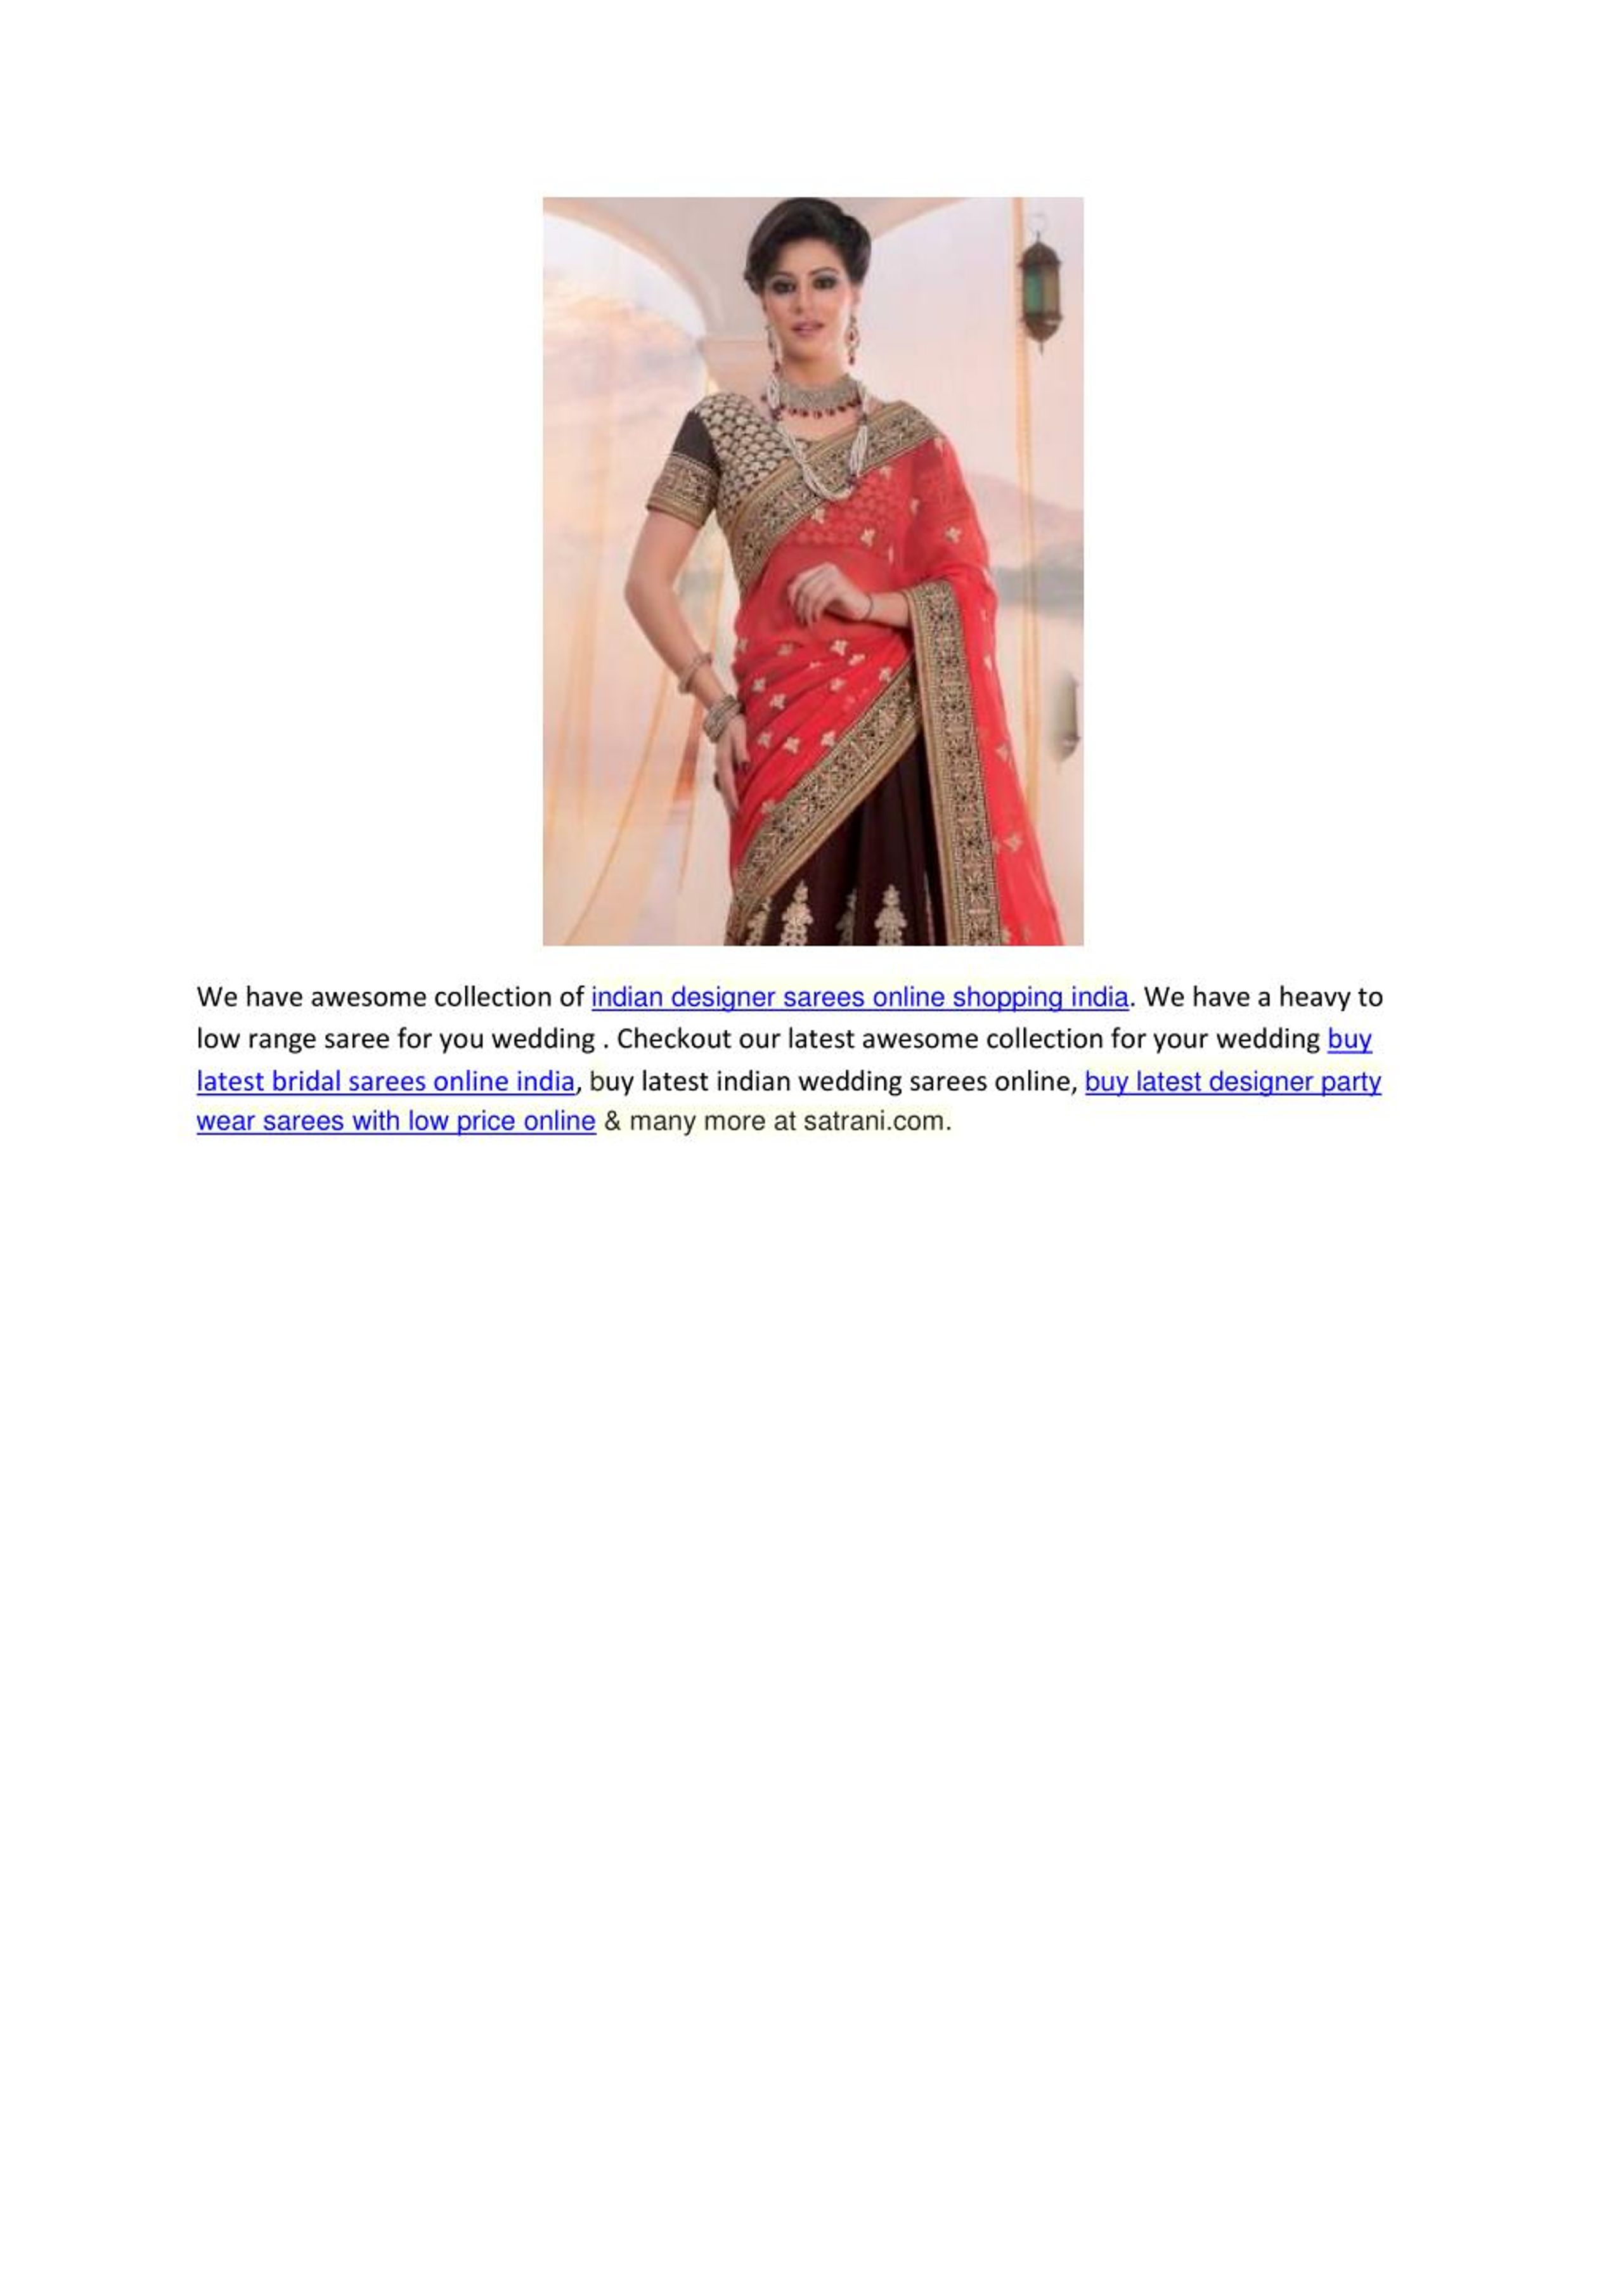 Ppt Indian Wedding Saree Collection Powerpoint Presentation Free Download Id 7233172,Aqua Design Innovations